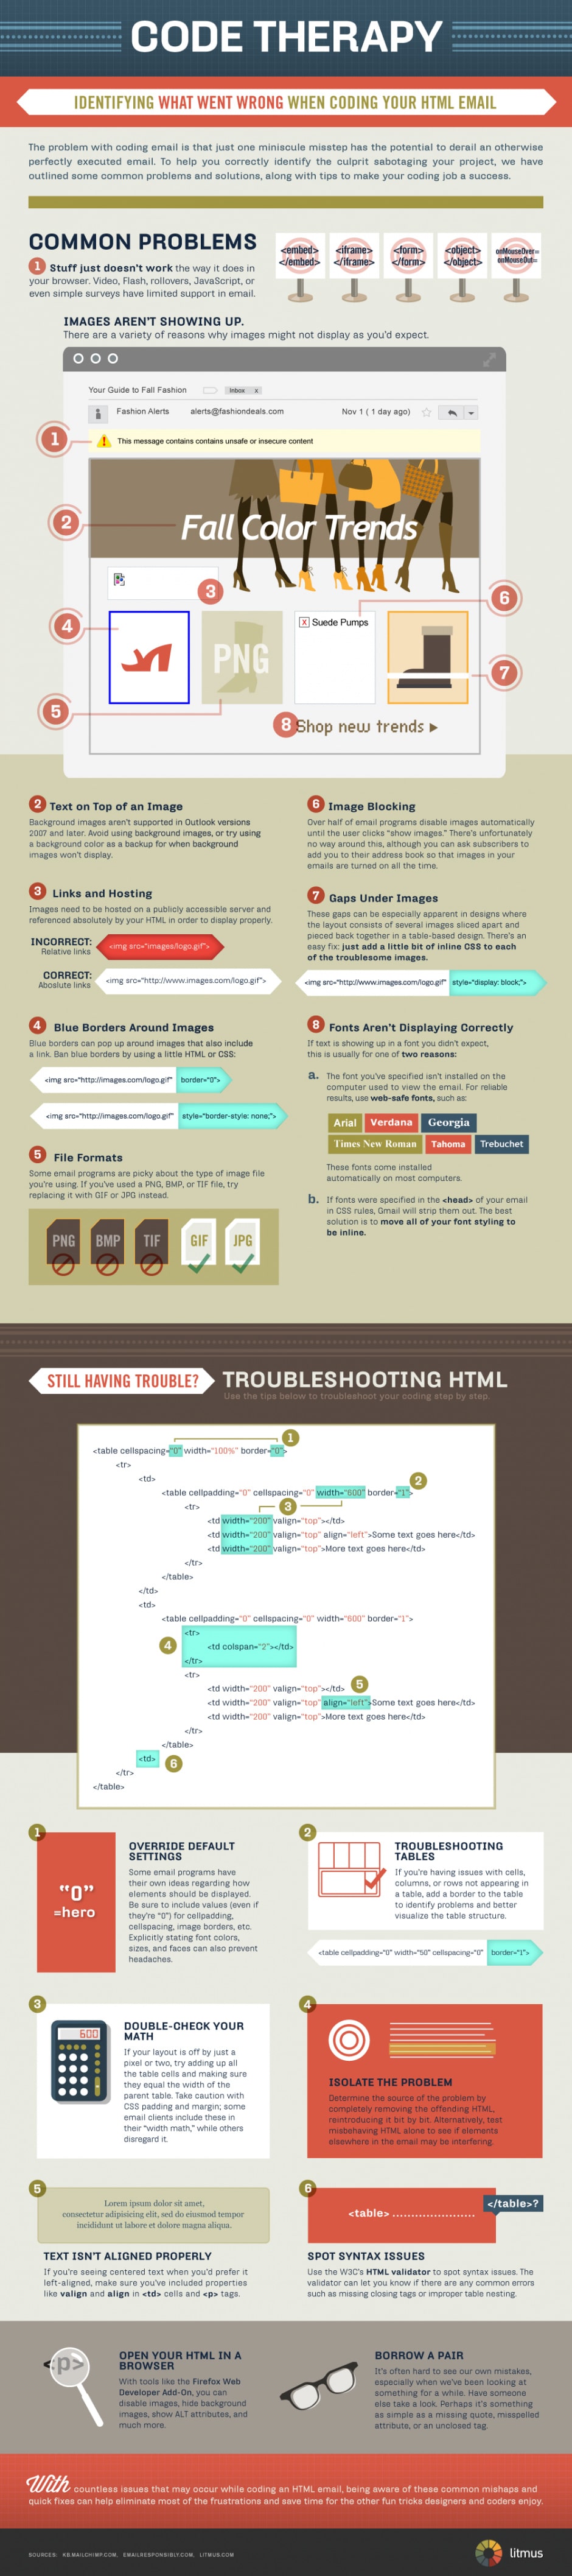 Bug Fight Your HTML Email Code With These 16 Tips [Infographic]